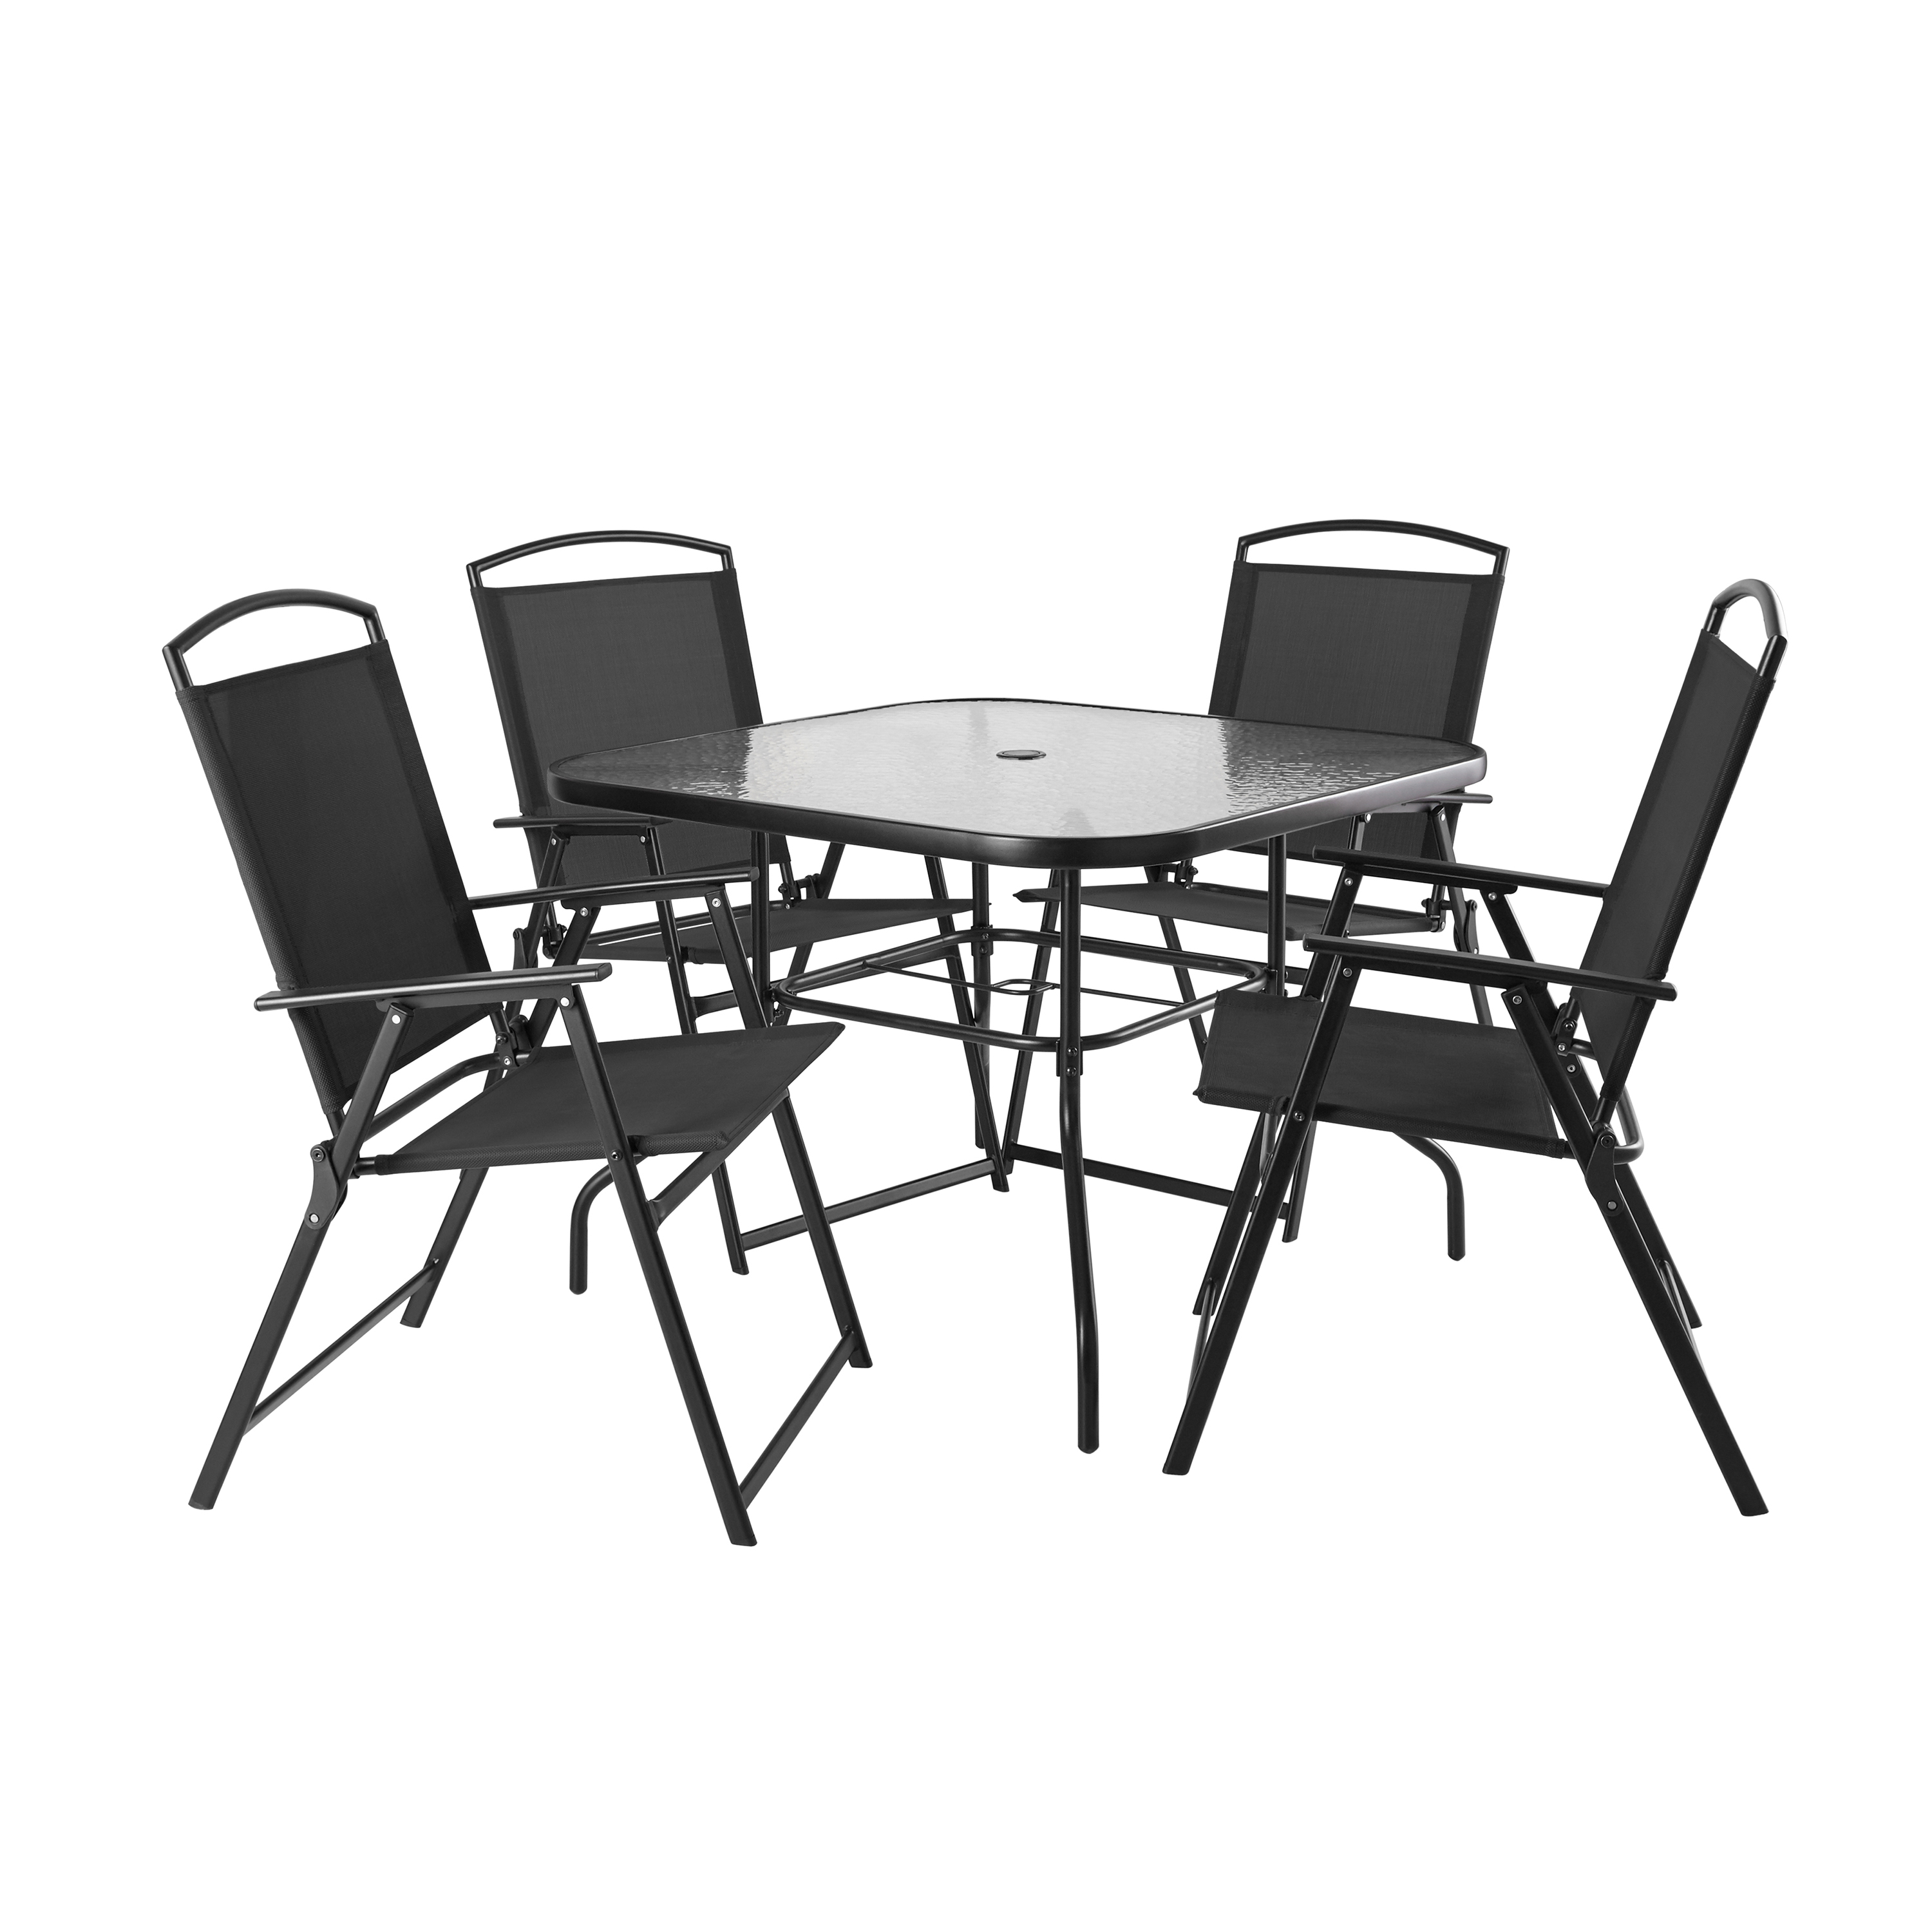 Mainstays Heritage Park Outdoor Patio 5 Piece Dining Set, 4 person seating, Black - image 2 of 10